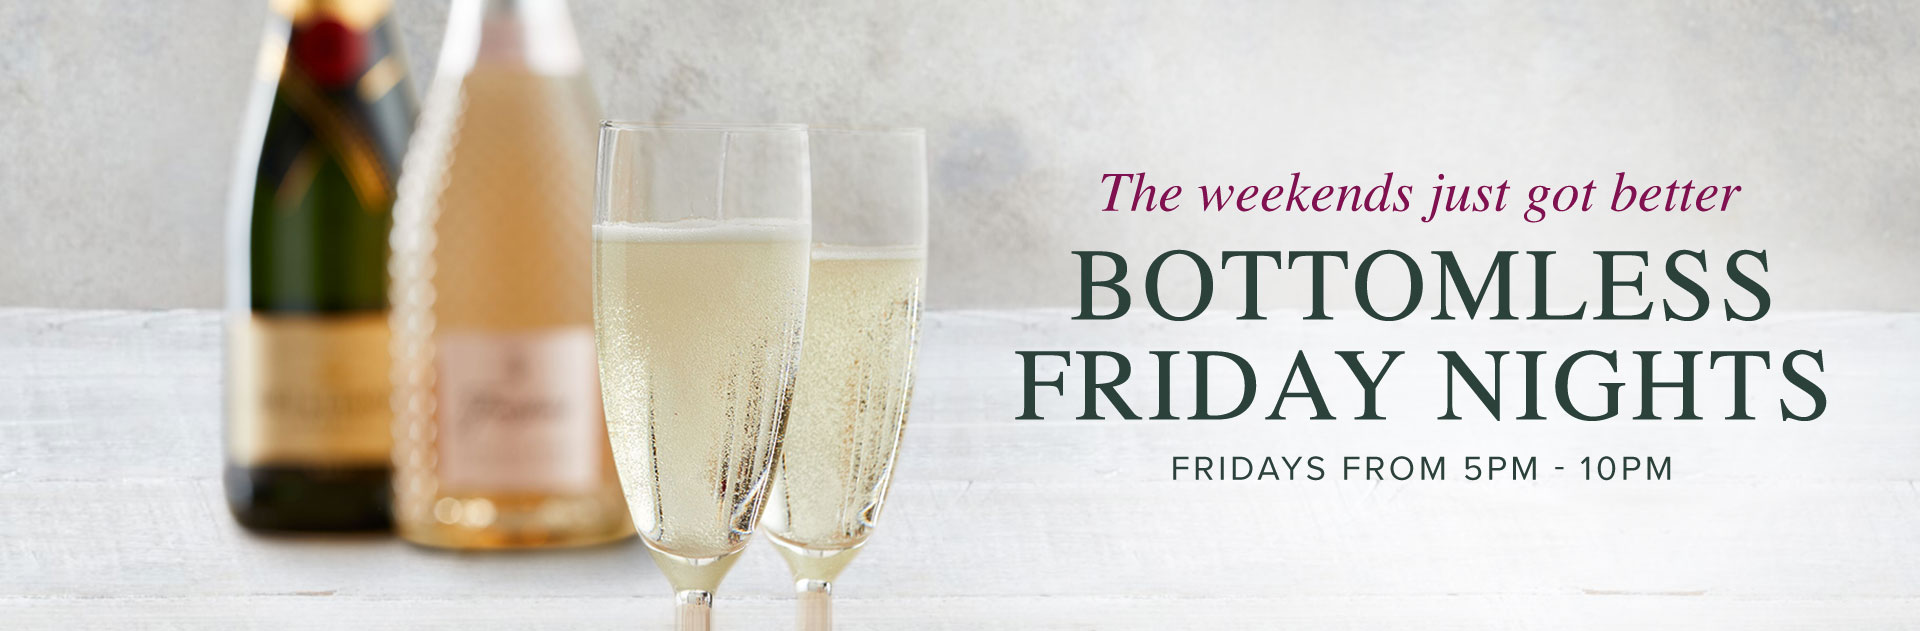 Bottomless Friday at The Three Stags